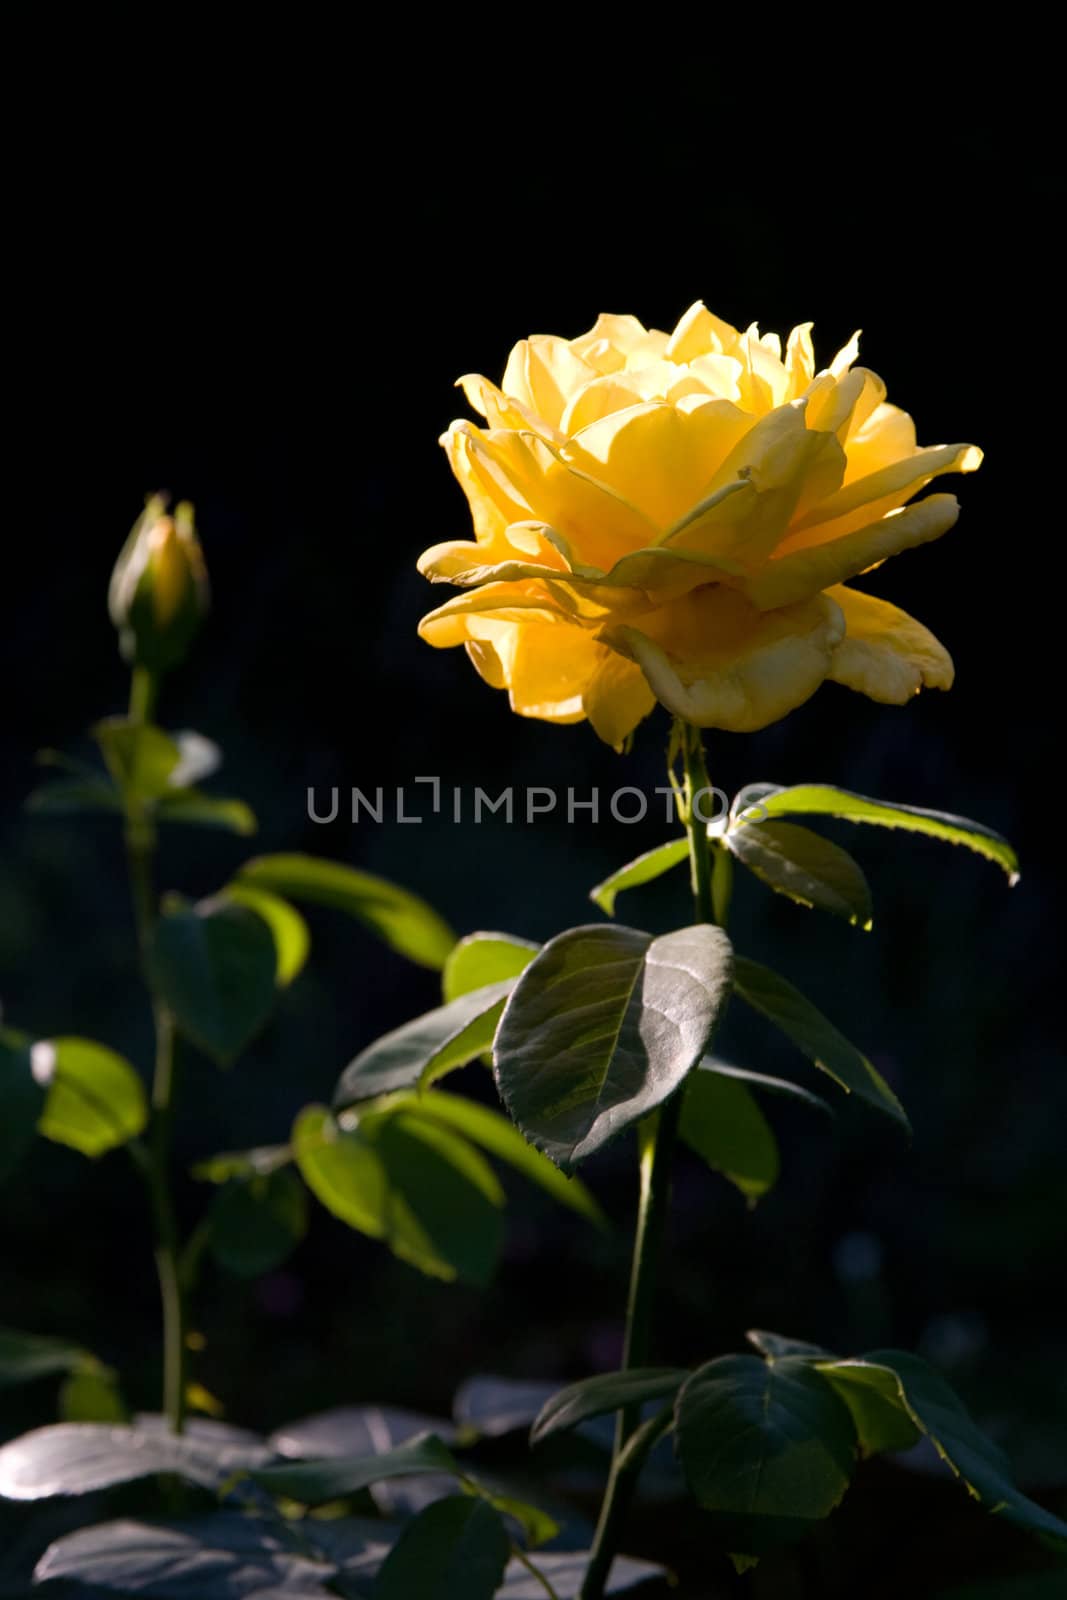 A rose in the morning light